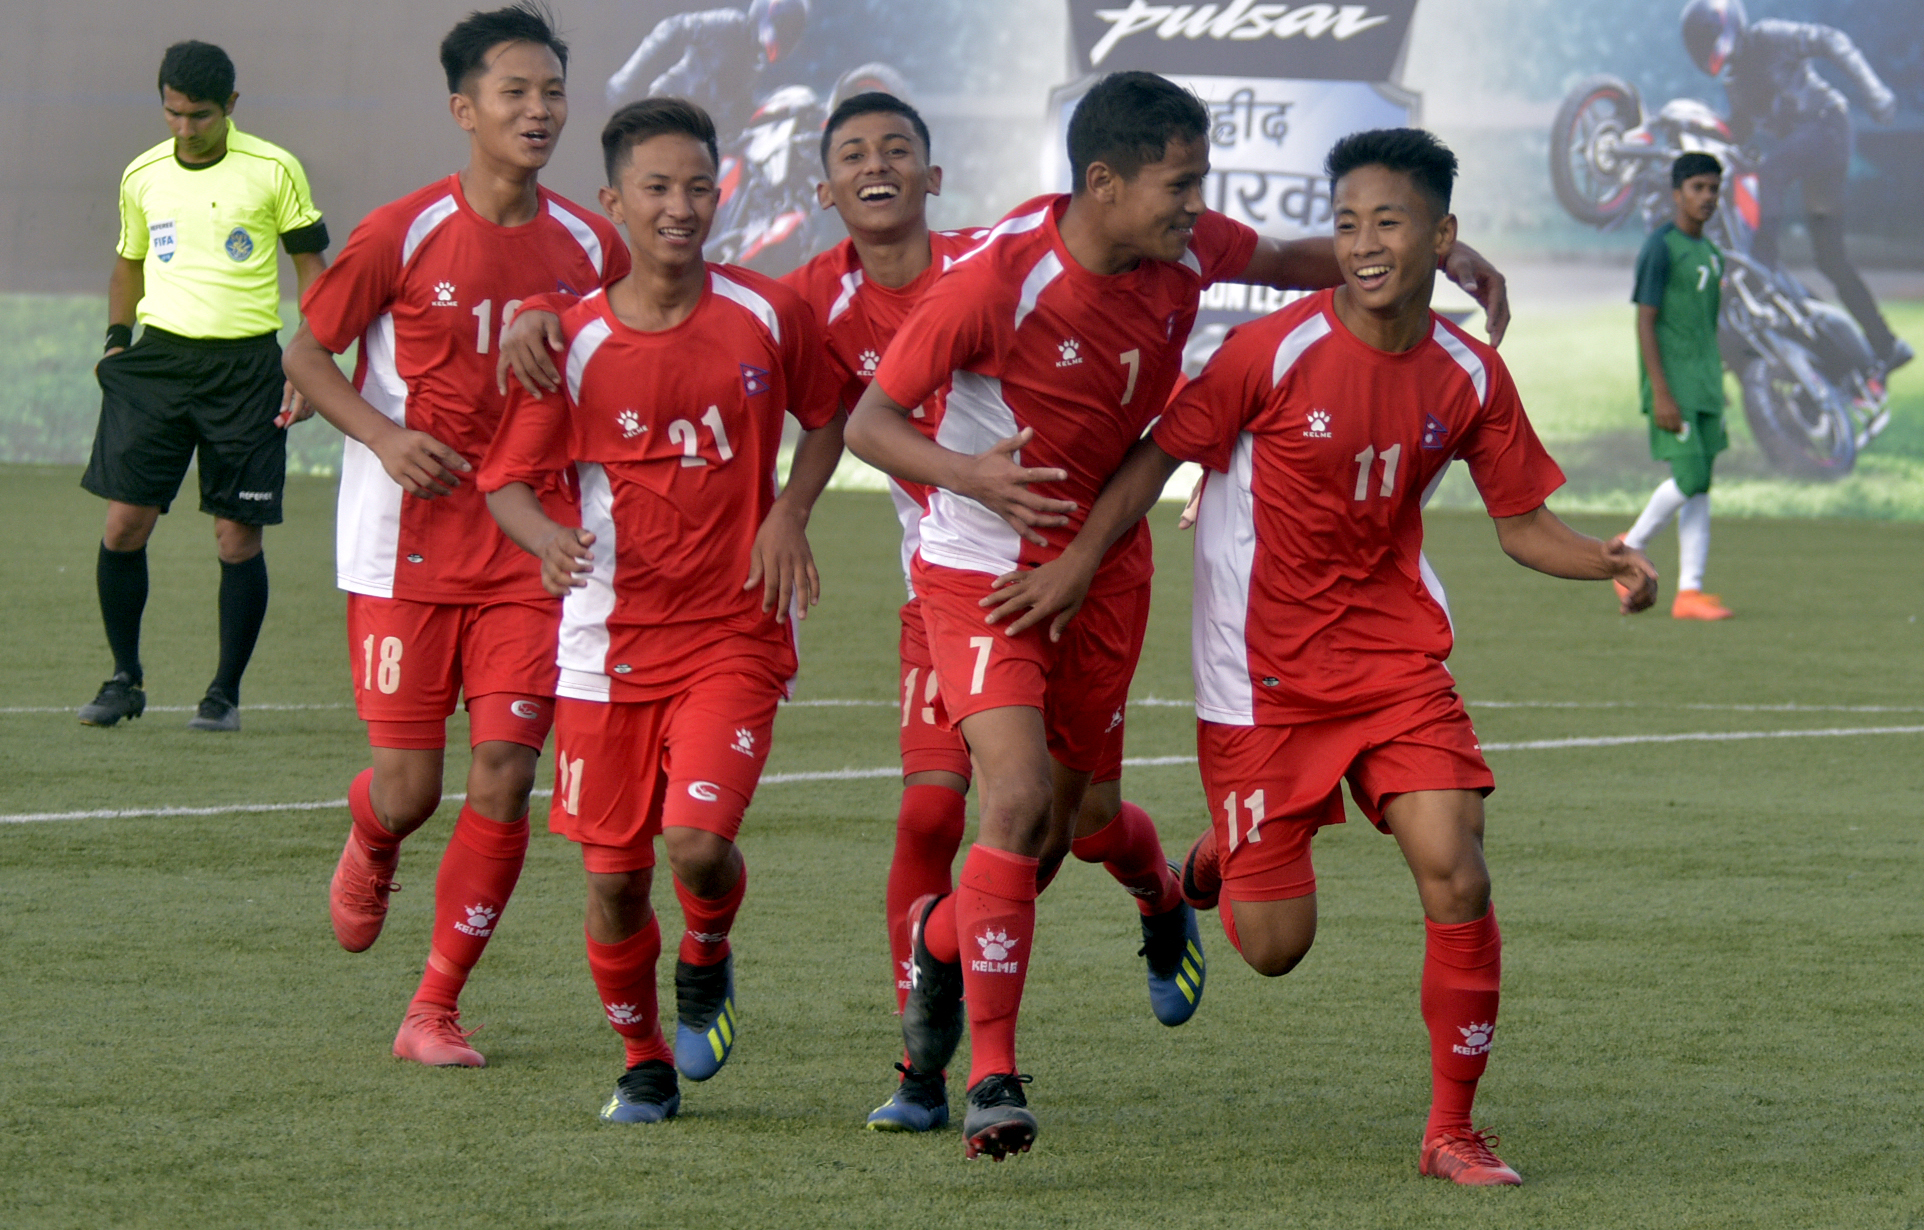 Nepali players celebrate a goal against the Maldives during their SAFF U-15 Football Championship match at the ANFA Complex grounds in Lalitpur on Thursday, October 25, 2018. Photo: AP